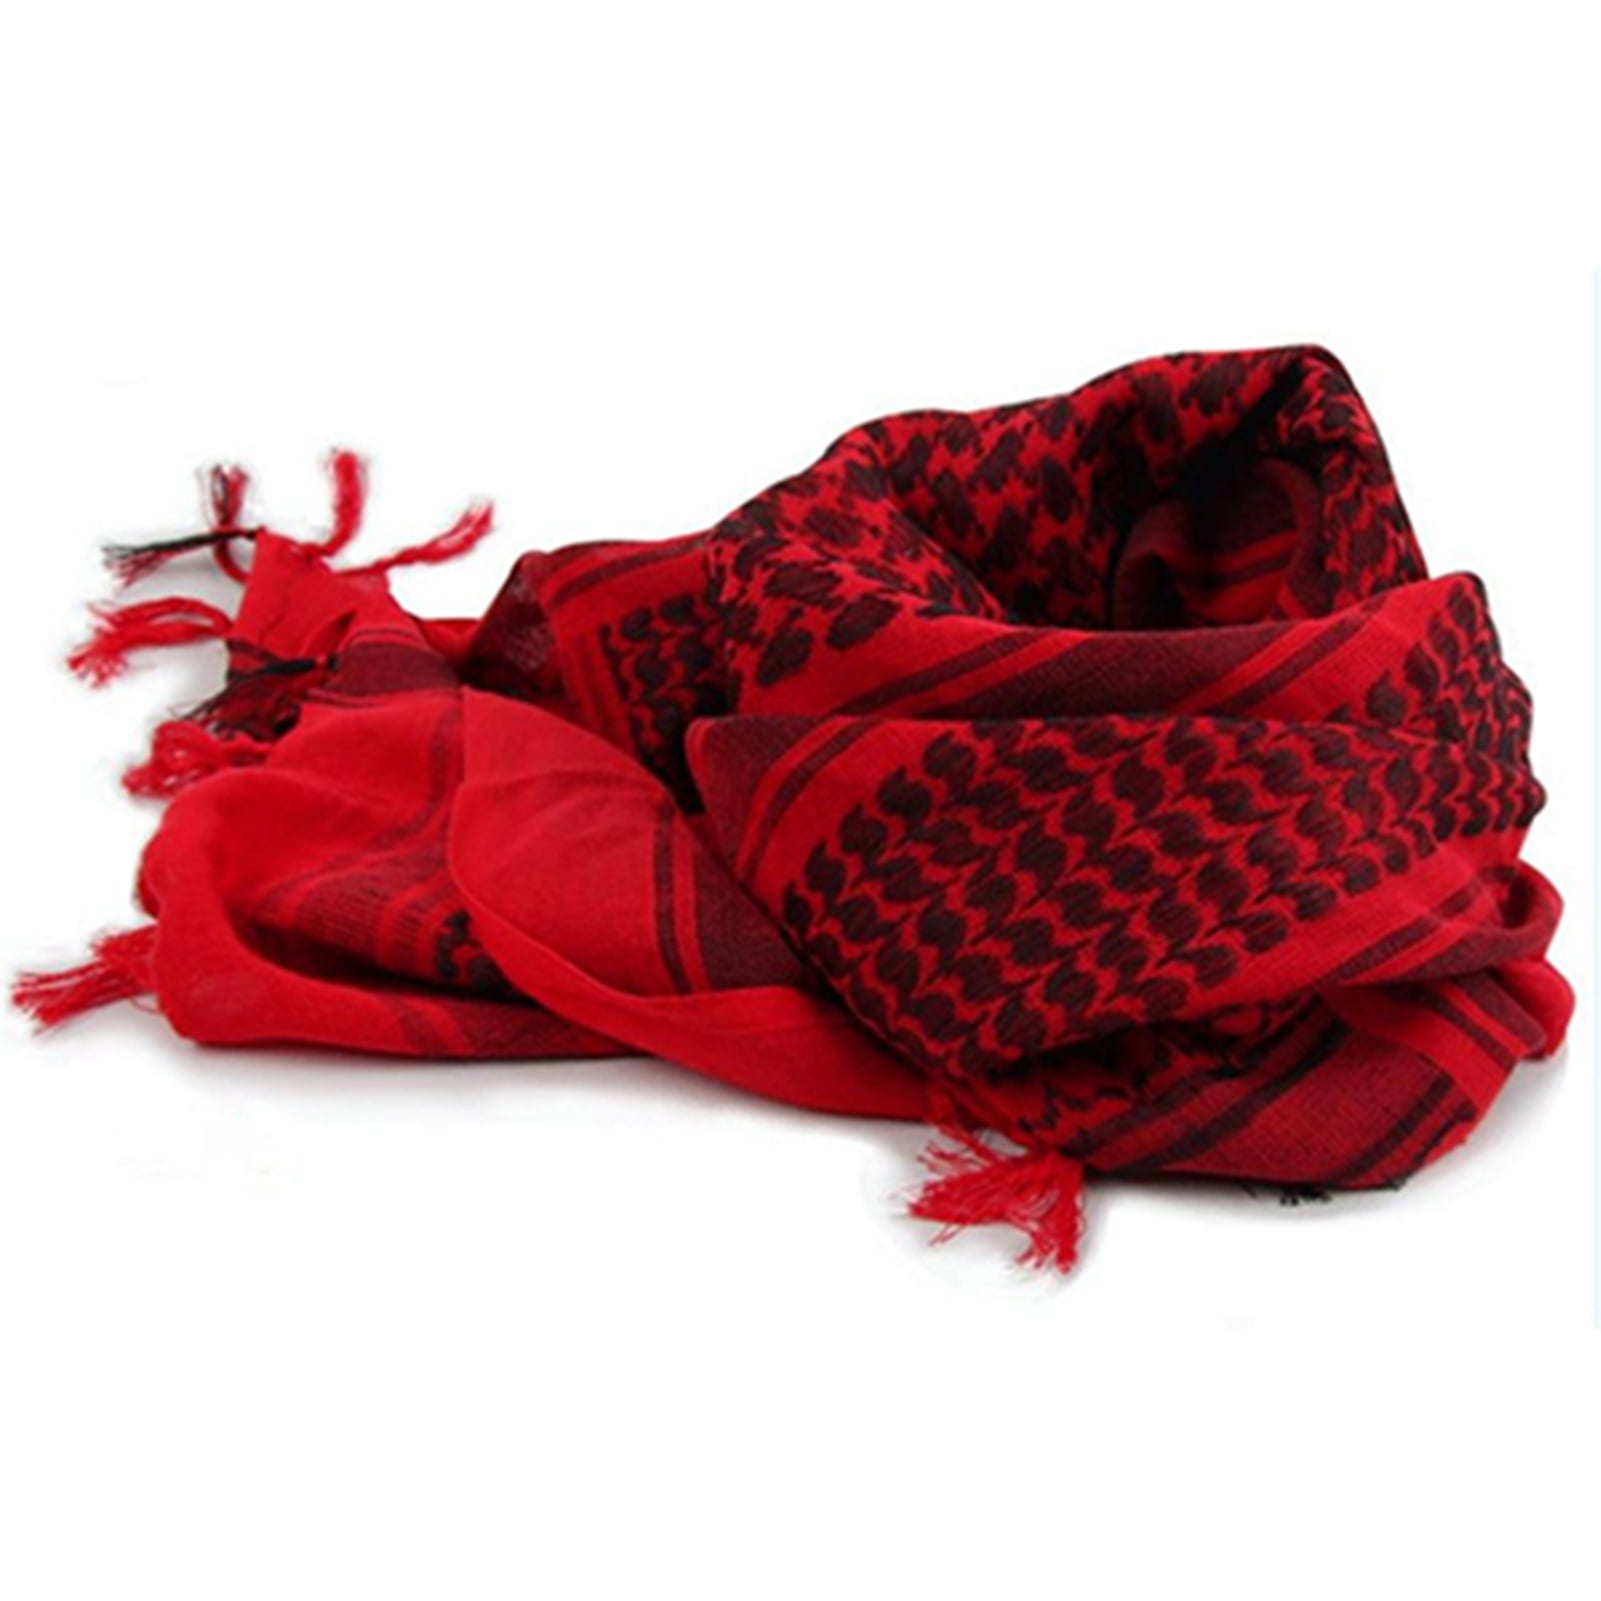 Shemagh Scarf - Desert Shemagh Scarves For Men and Women Red&Black